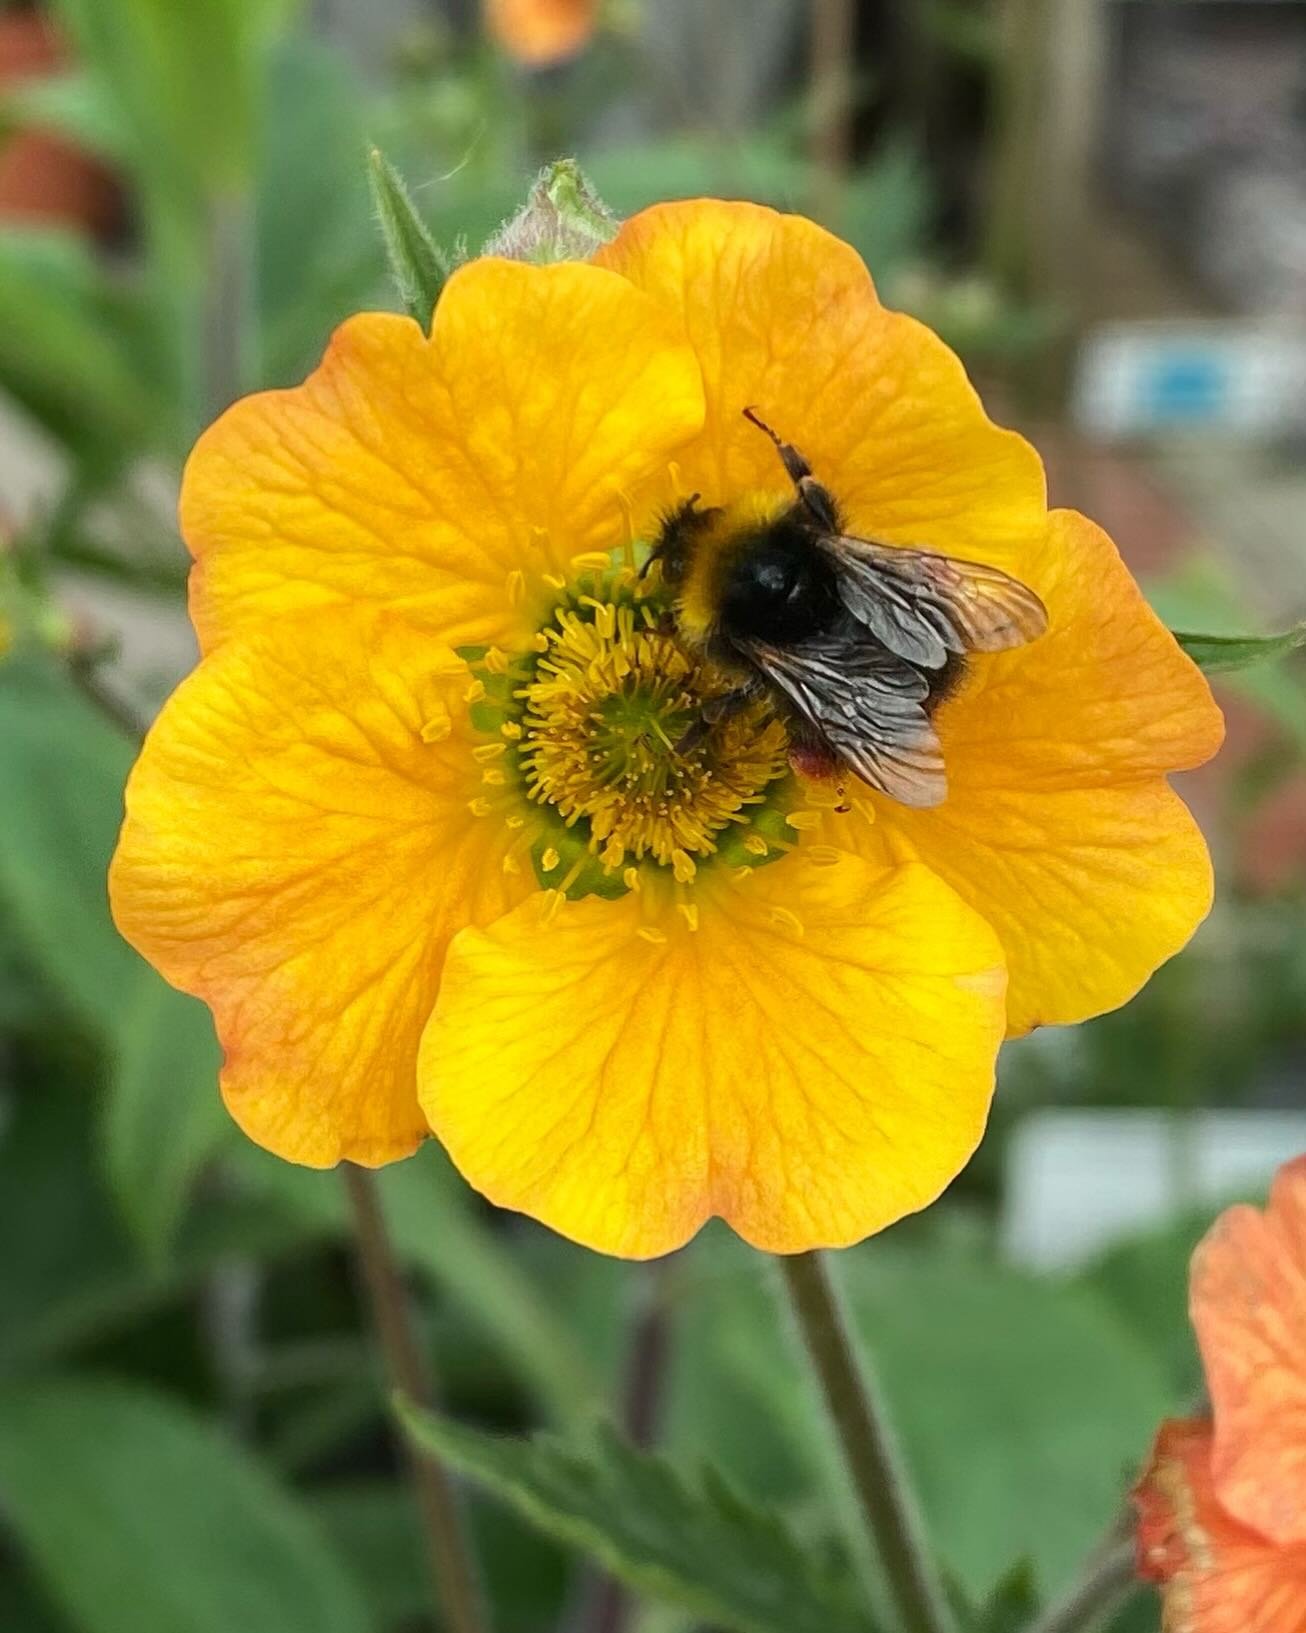 Lovely to see the bees are out enjoying the sunshine this morning 🐝
.
.
.
.
#knightsgardencentres #woldingham #chelsham